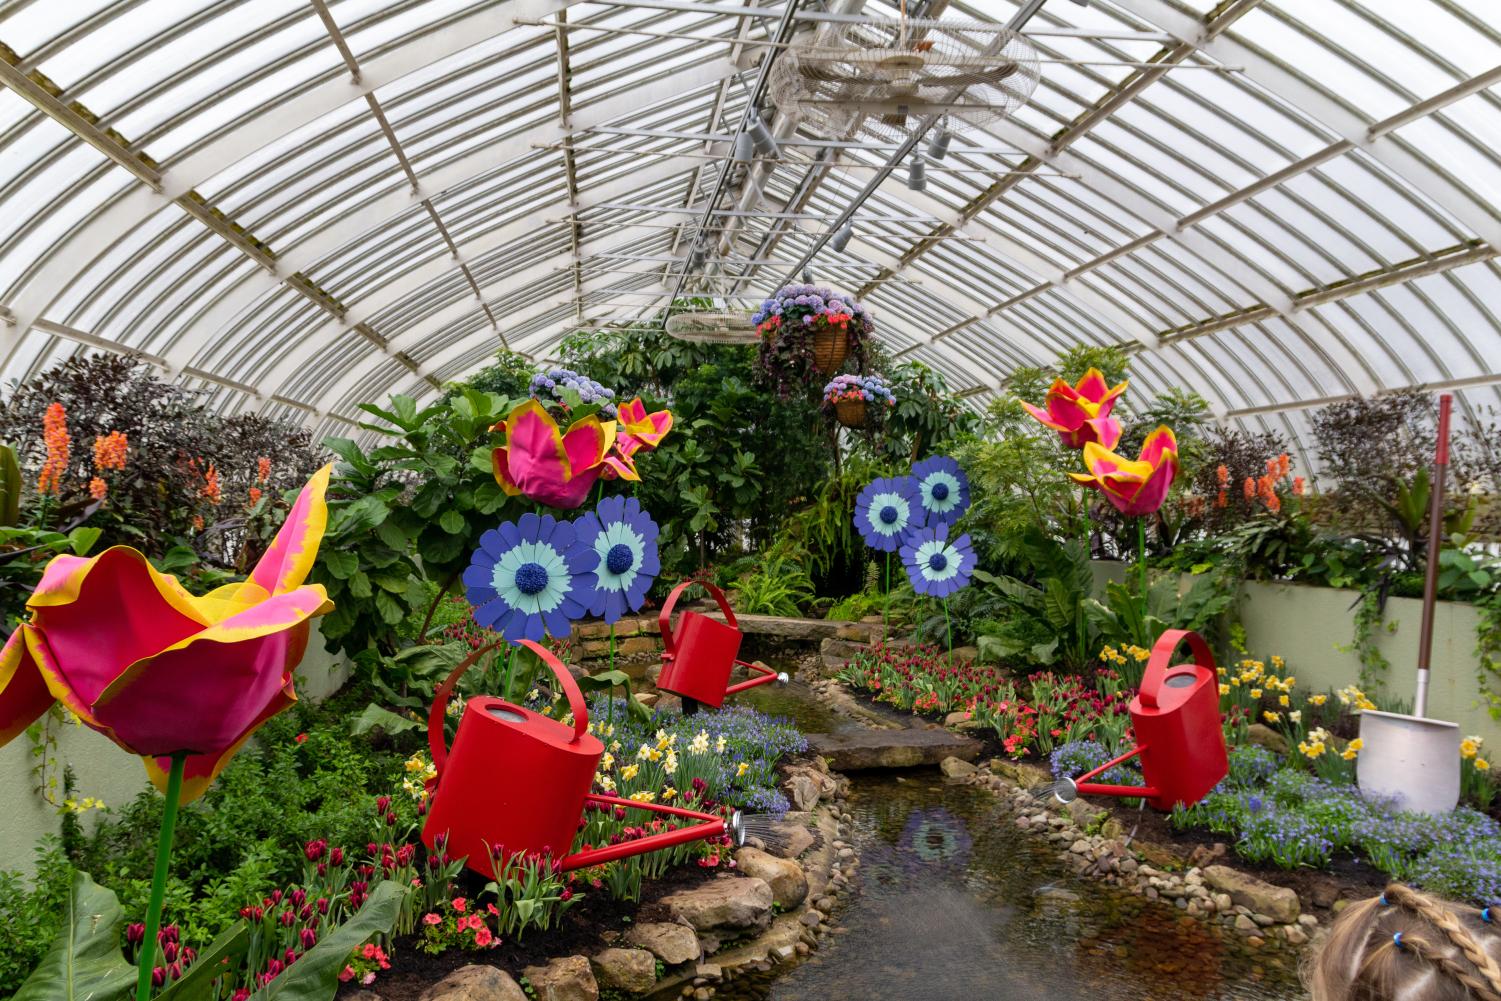 Spring is blooming at Phipps Botanical Garden show - The Pitt News